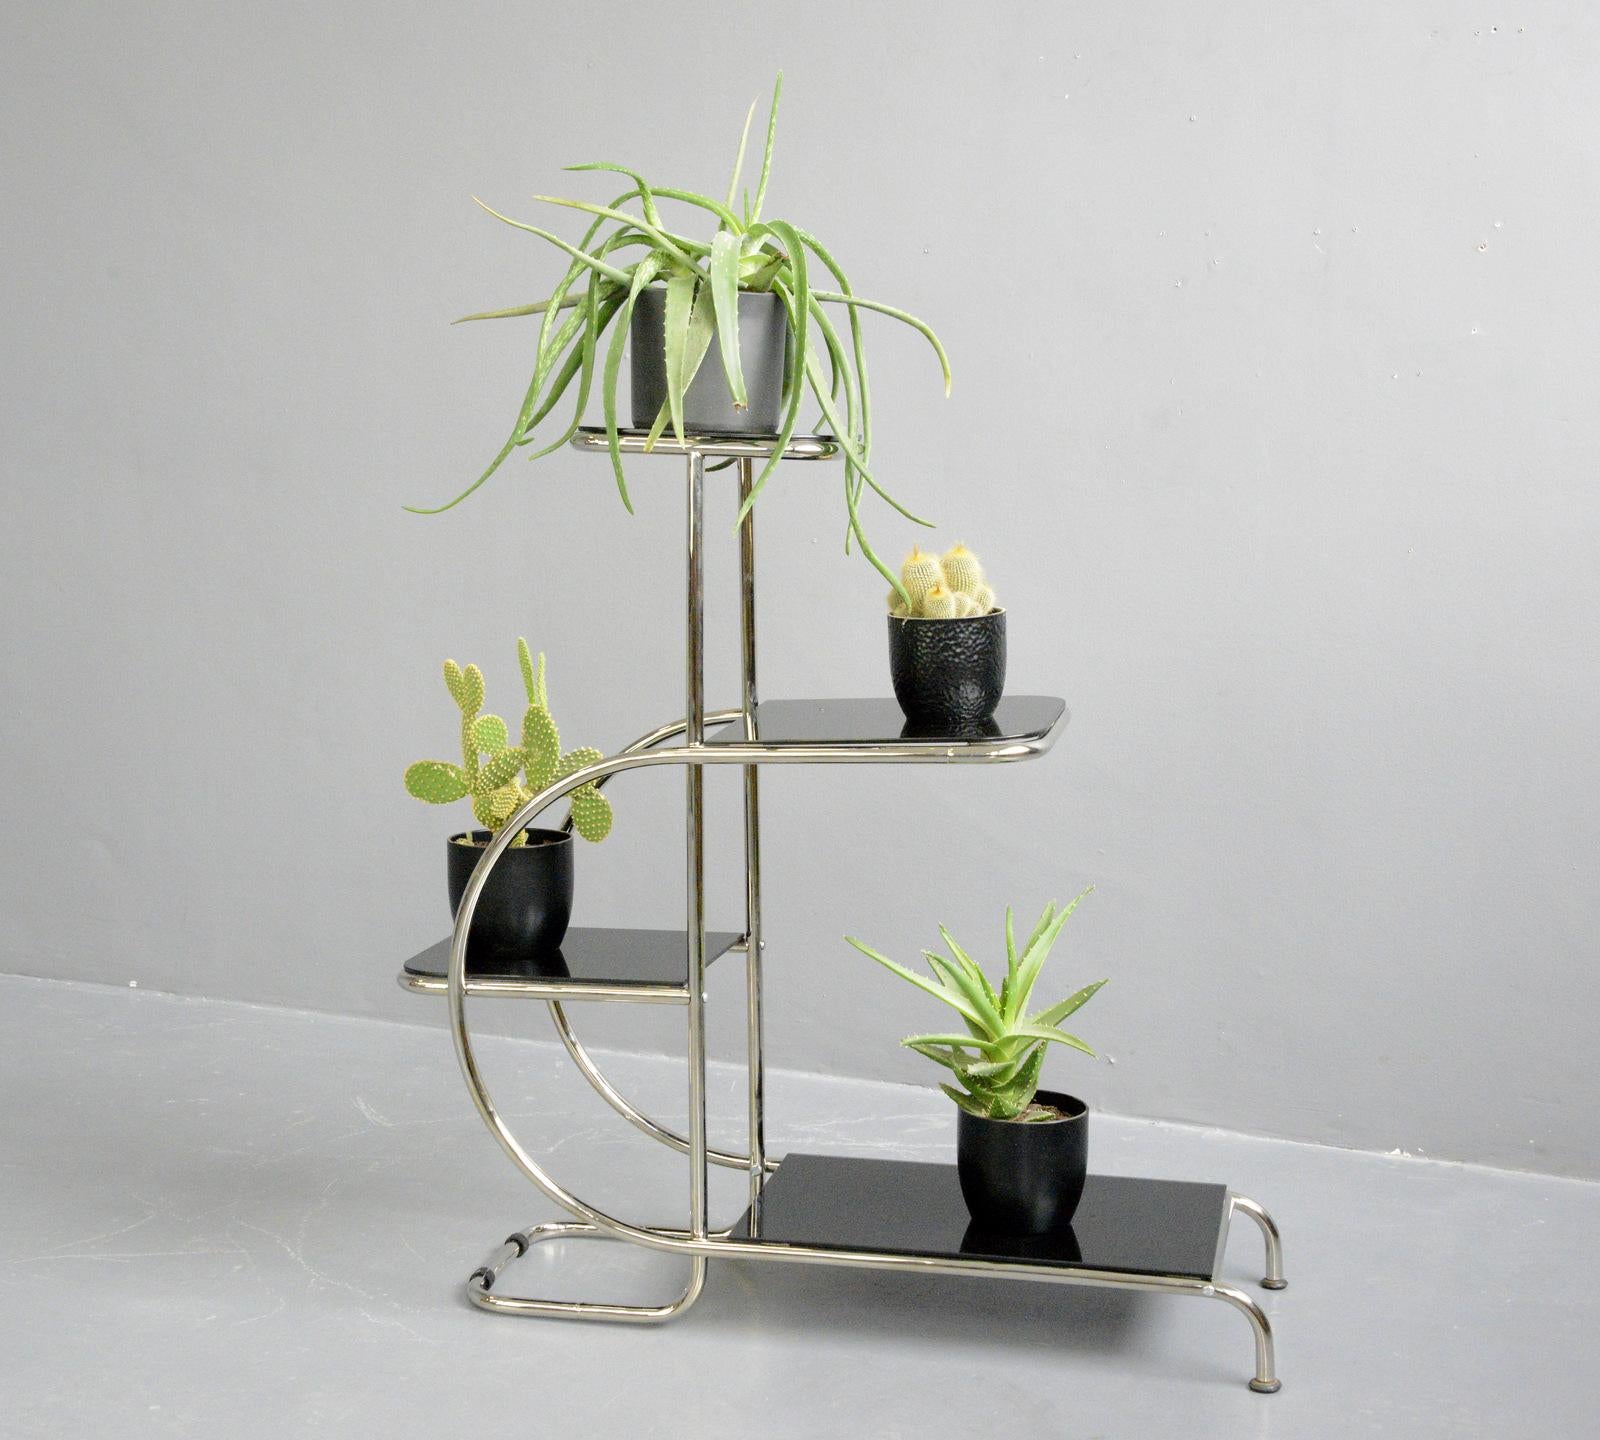 Bauhaus plant stand by Emile Guyot for Thonet Circa 1930s

- Chromed tubular steel
- Cantilever design
- Toughened black glass shelves
- Designed by Emile Guyot
- Produced by Thonet
- Czech ~ 1930s
- 92cm long x 34cm deep x 100cm